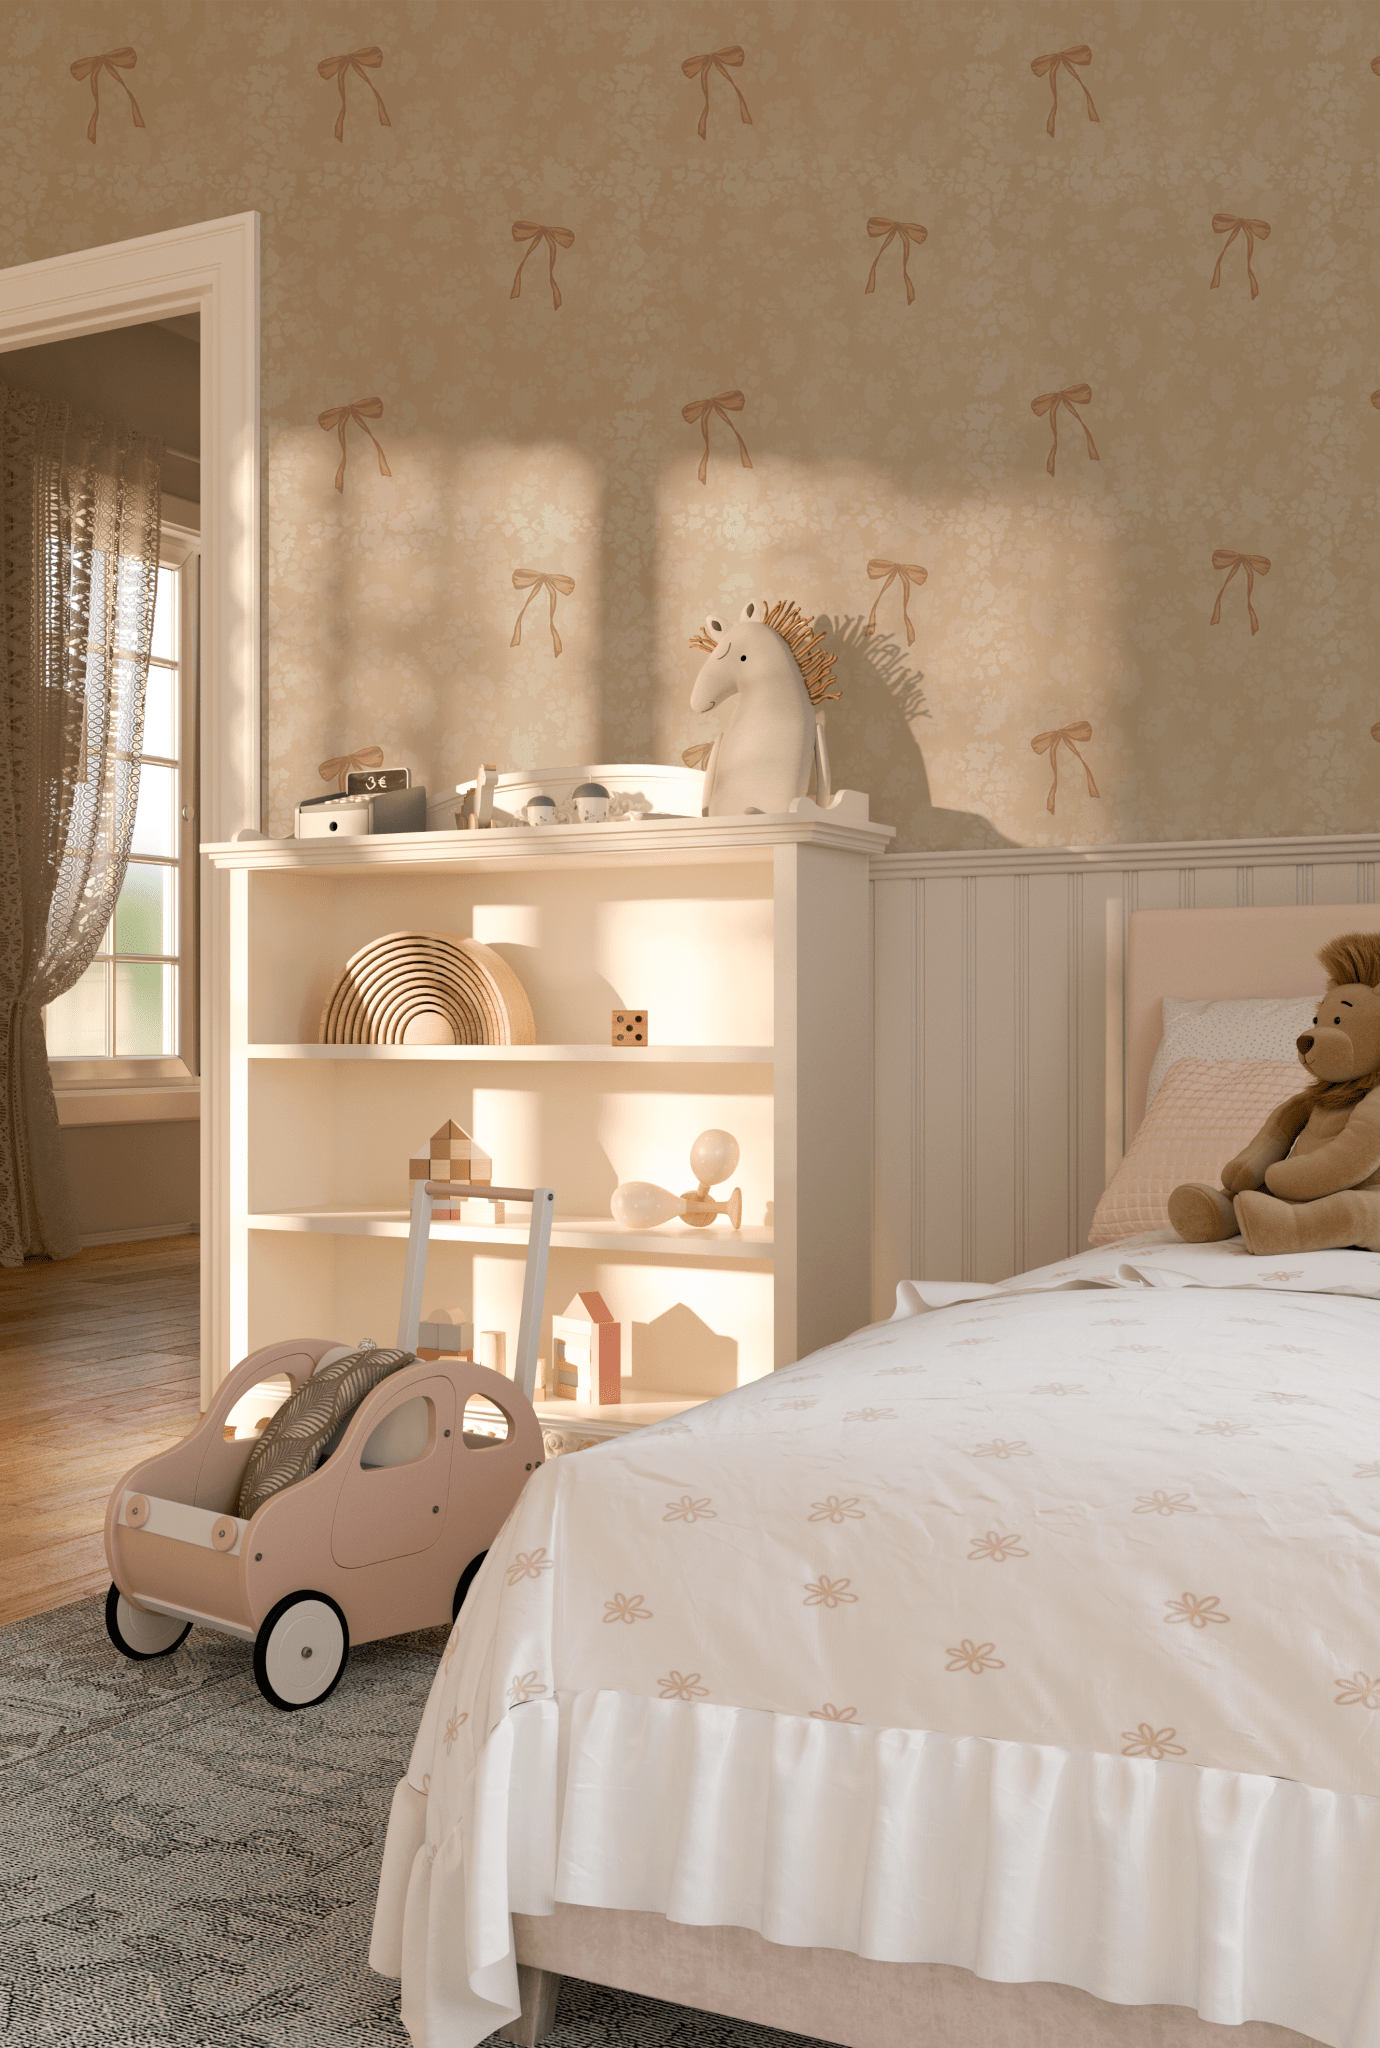 Children's bedroom with walls covered in soft beige wallpaper featuring delicate bow patterns, enhancing a cozy, playful atmosphere